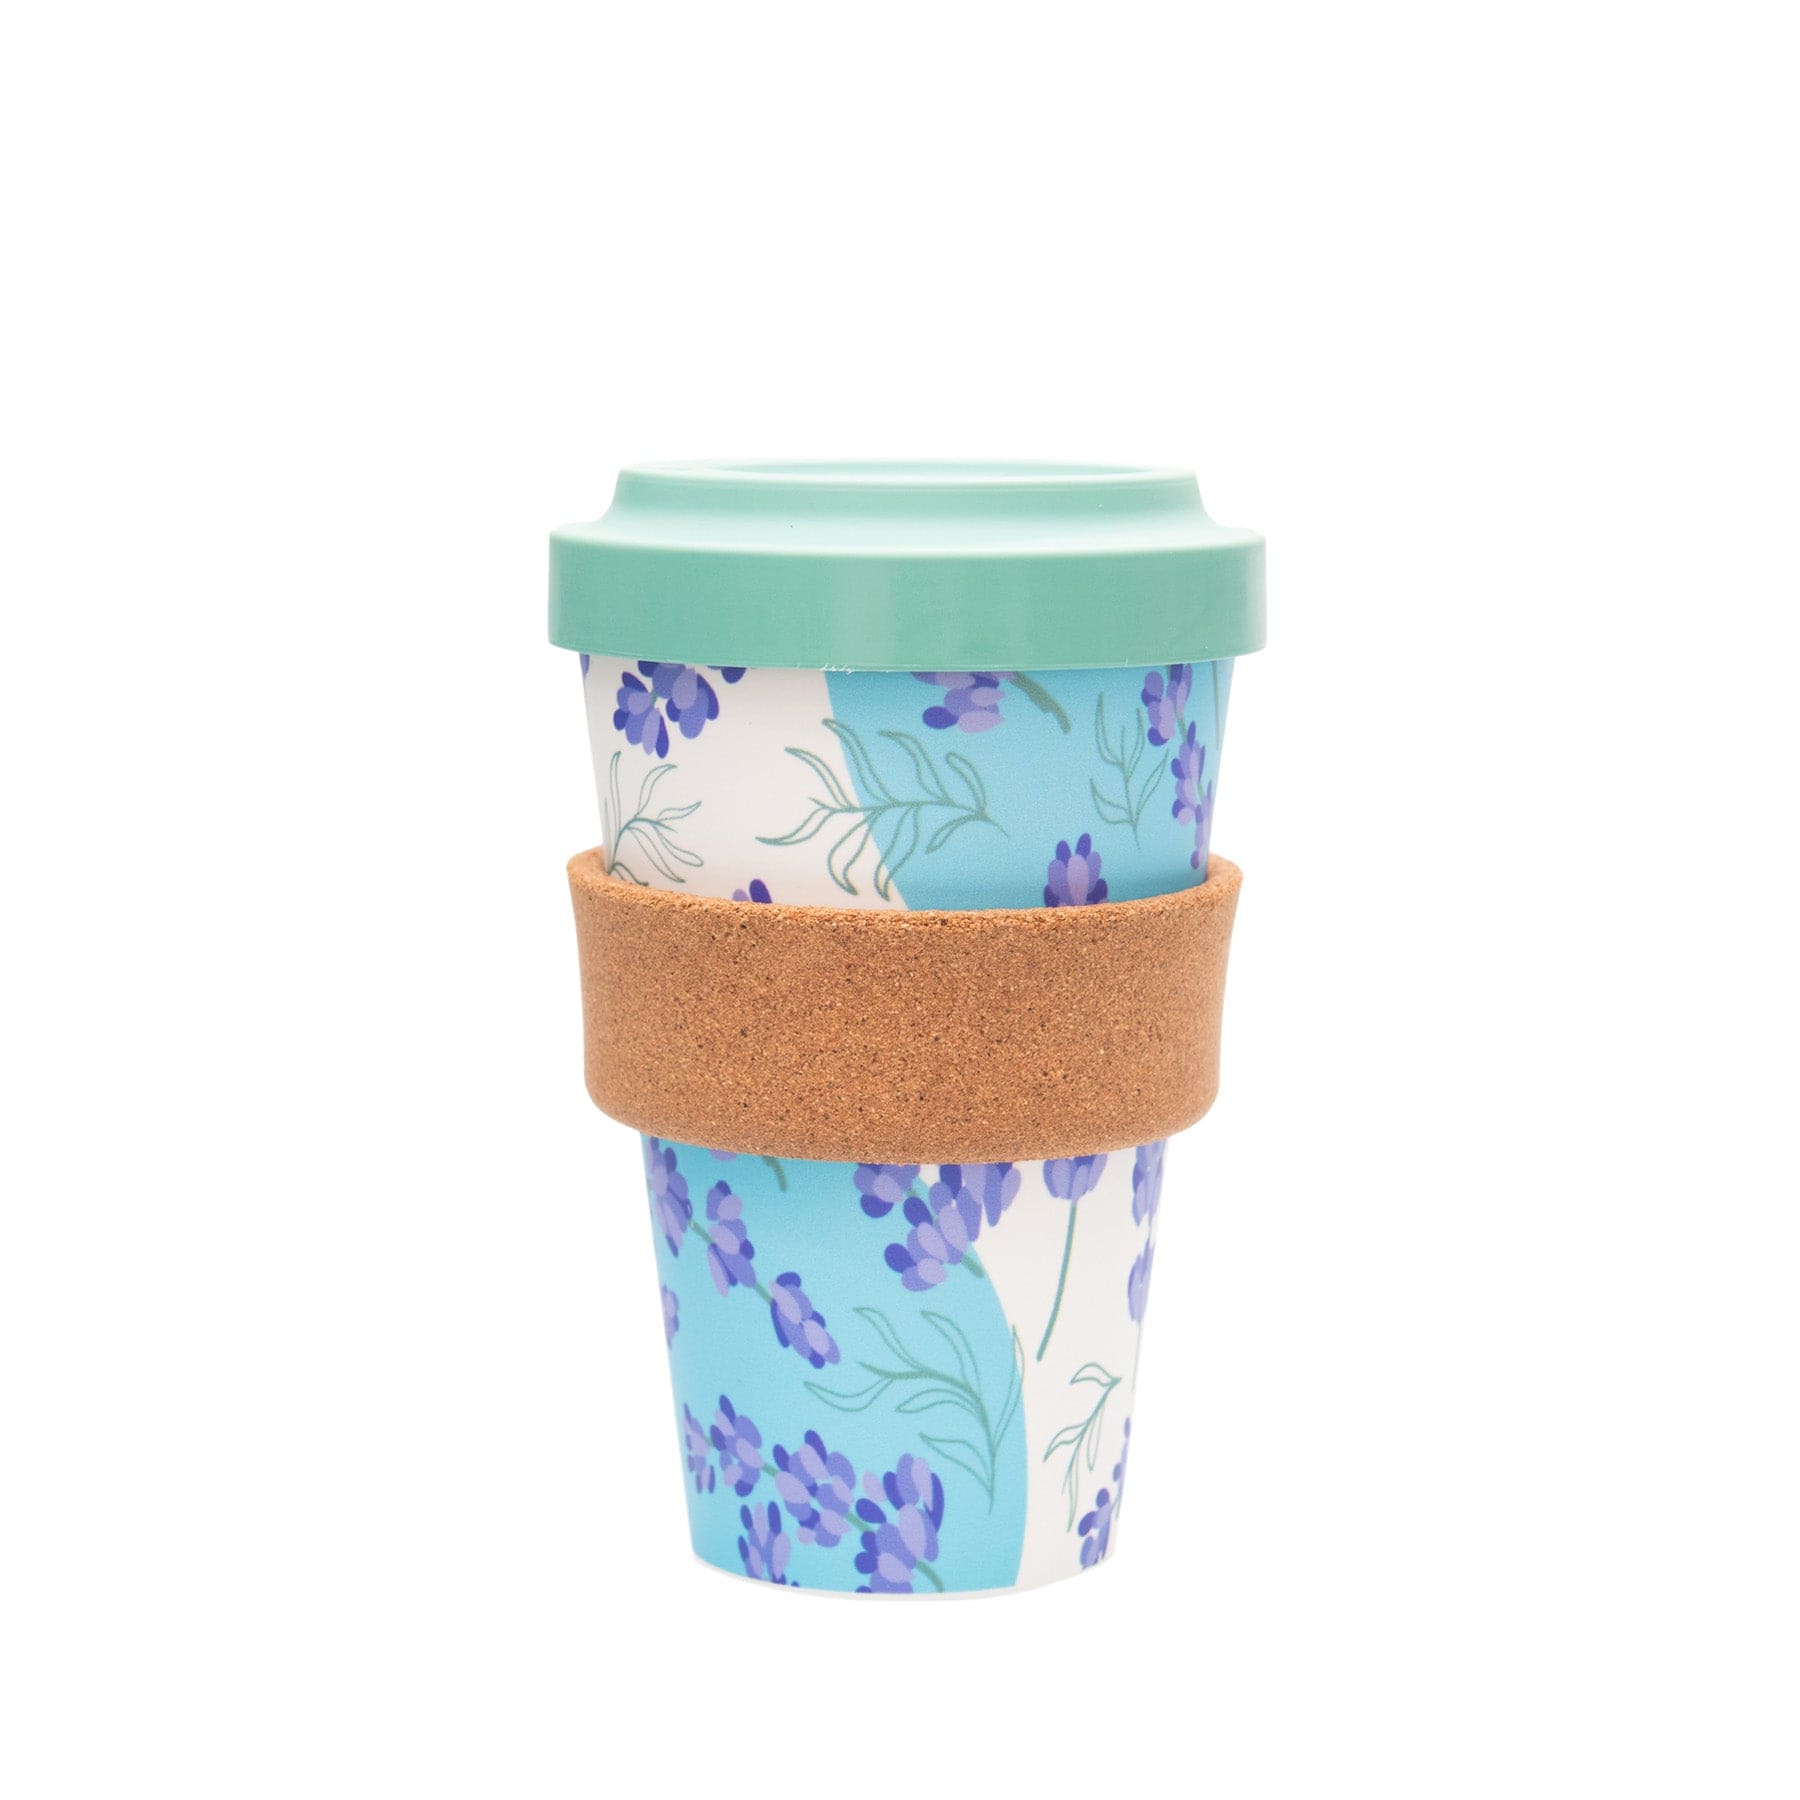 Reusable coffee cup with floral design and silicone lid, eco-friendly travel mug with cork sleeve, insulated beverage container on white background